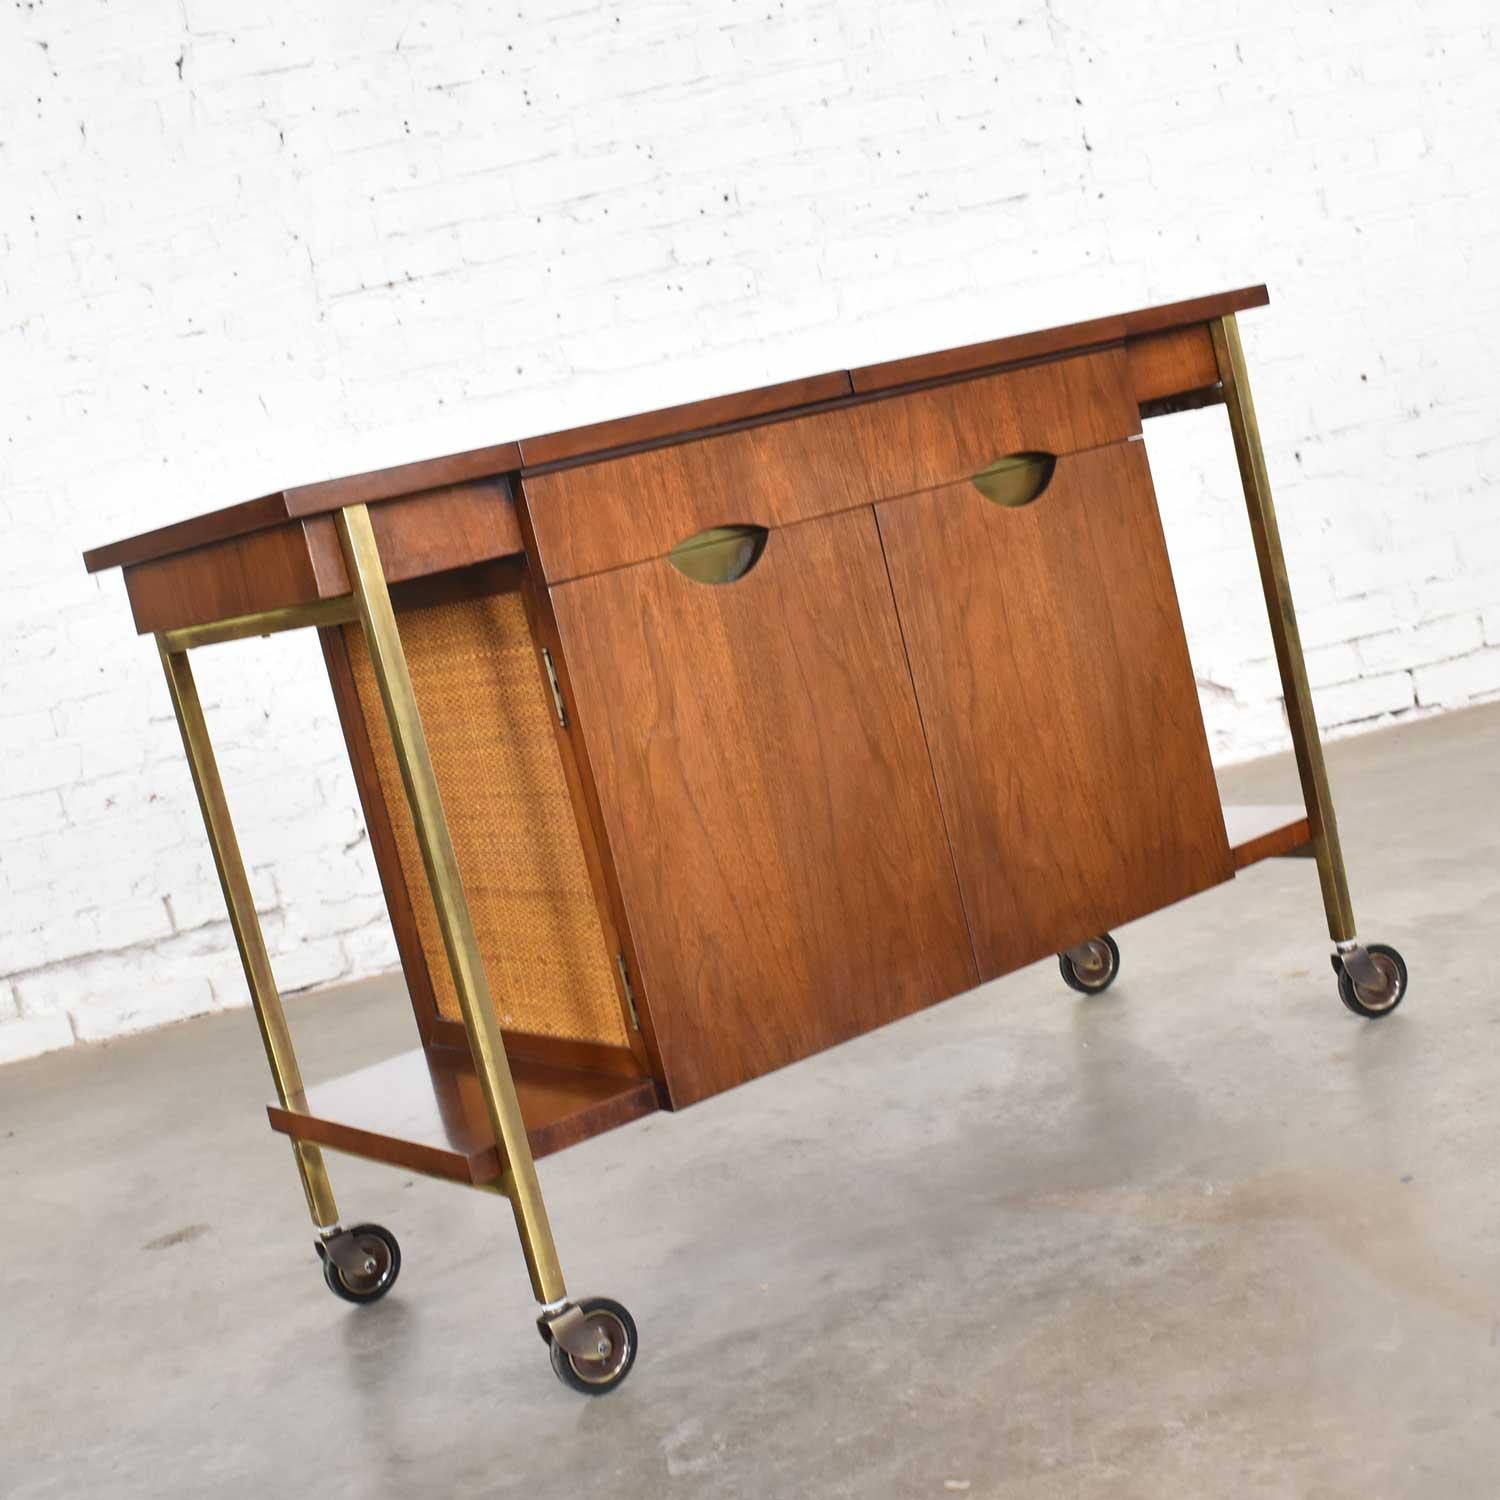 Attractive Mid-Century Modern walnut and cane rolling bar cart with Heritage stamped inside its drawer. This cart has only been cleaned and although there are a few minor scratches on the top, it is in fabulous vintage condition. One of the brass